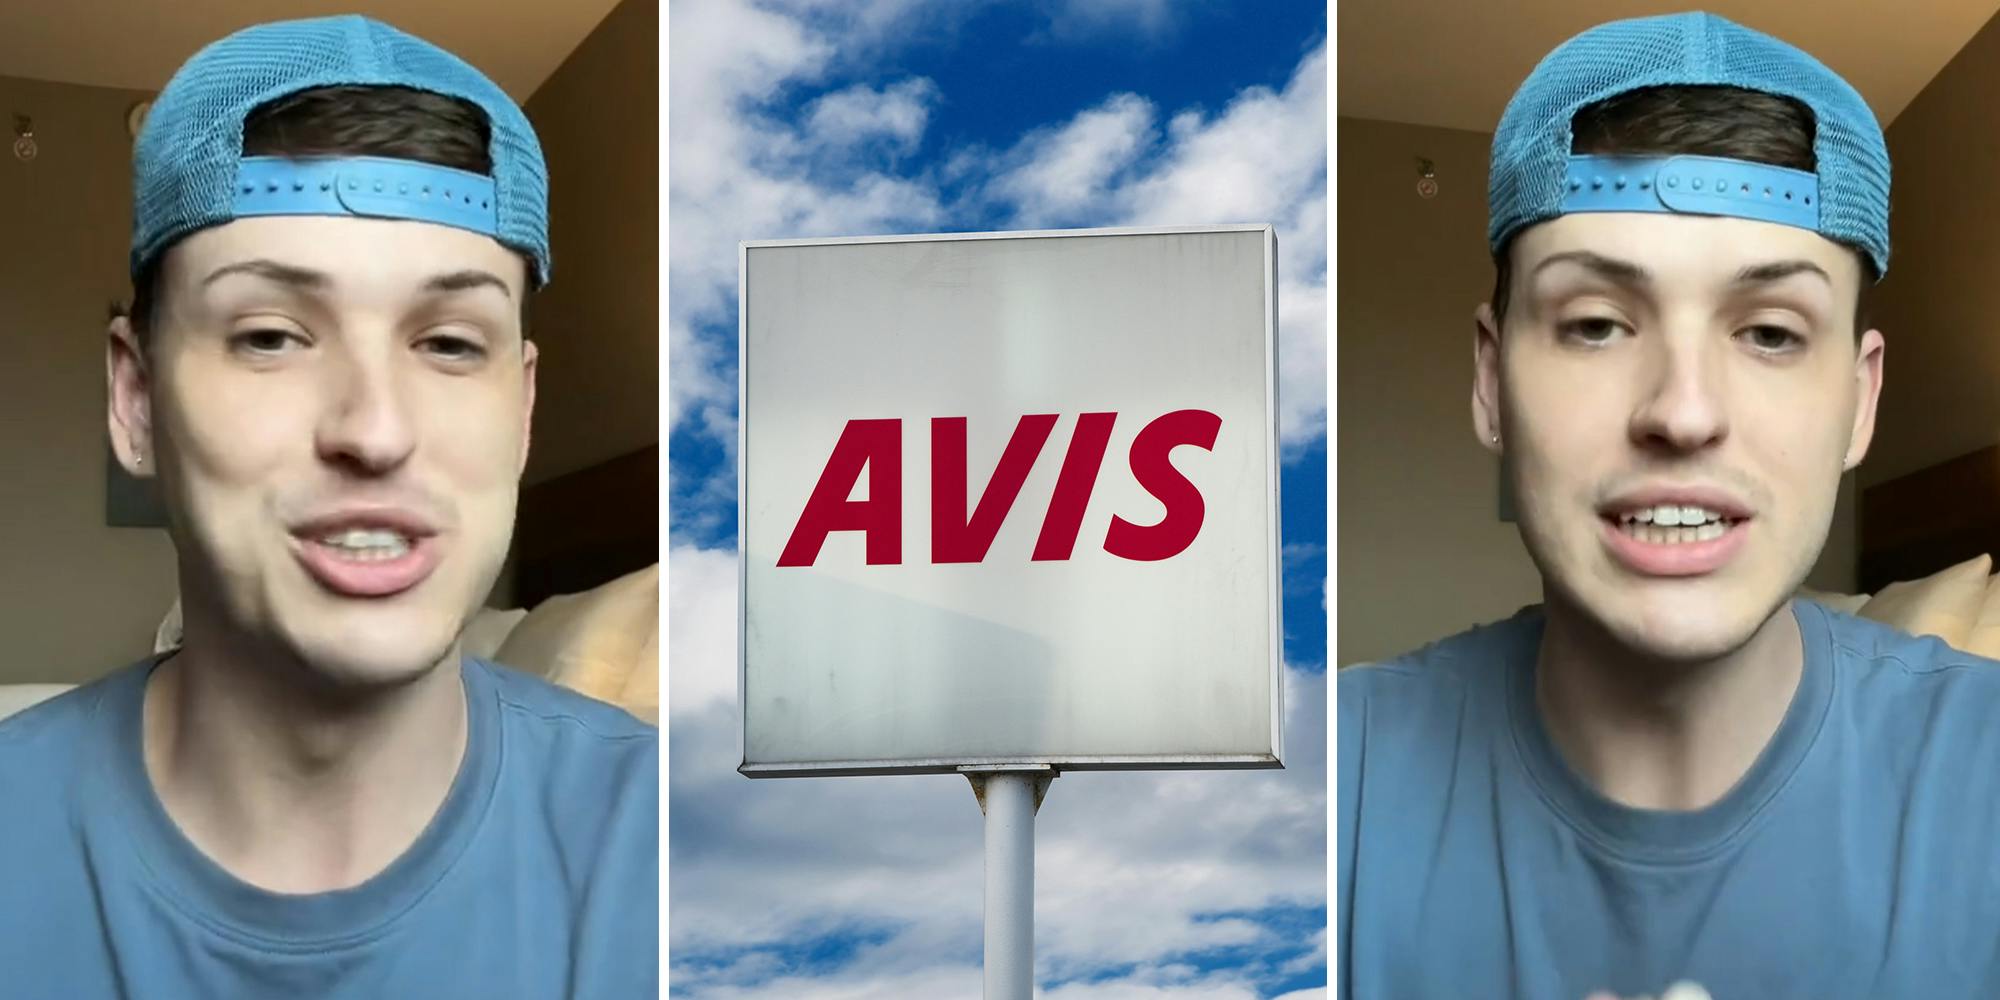 ‘I am still getting the blame’: Avis customer says he returned his Toyota on time. Now he’s being accused of stealing it